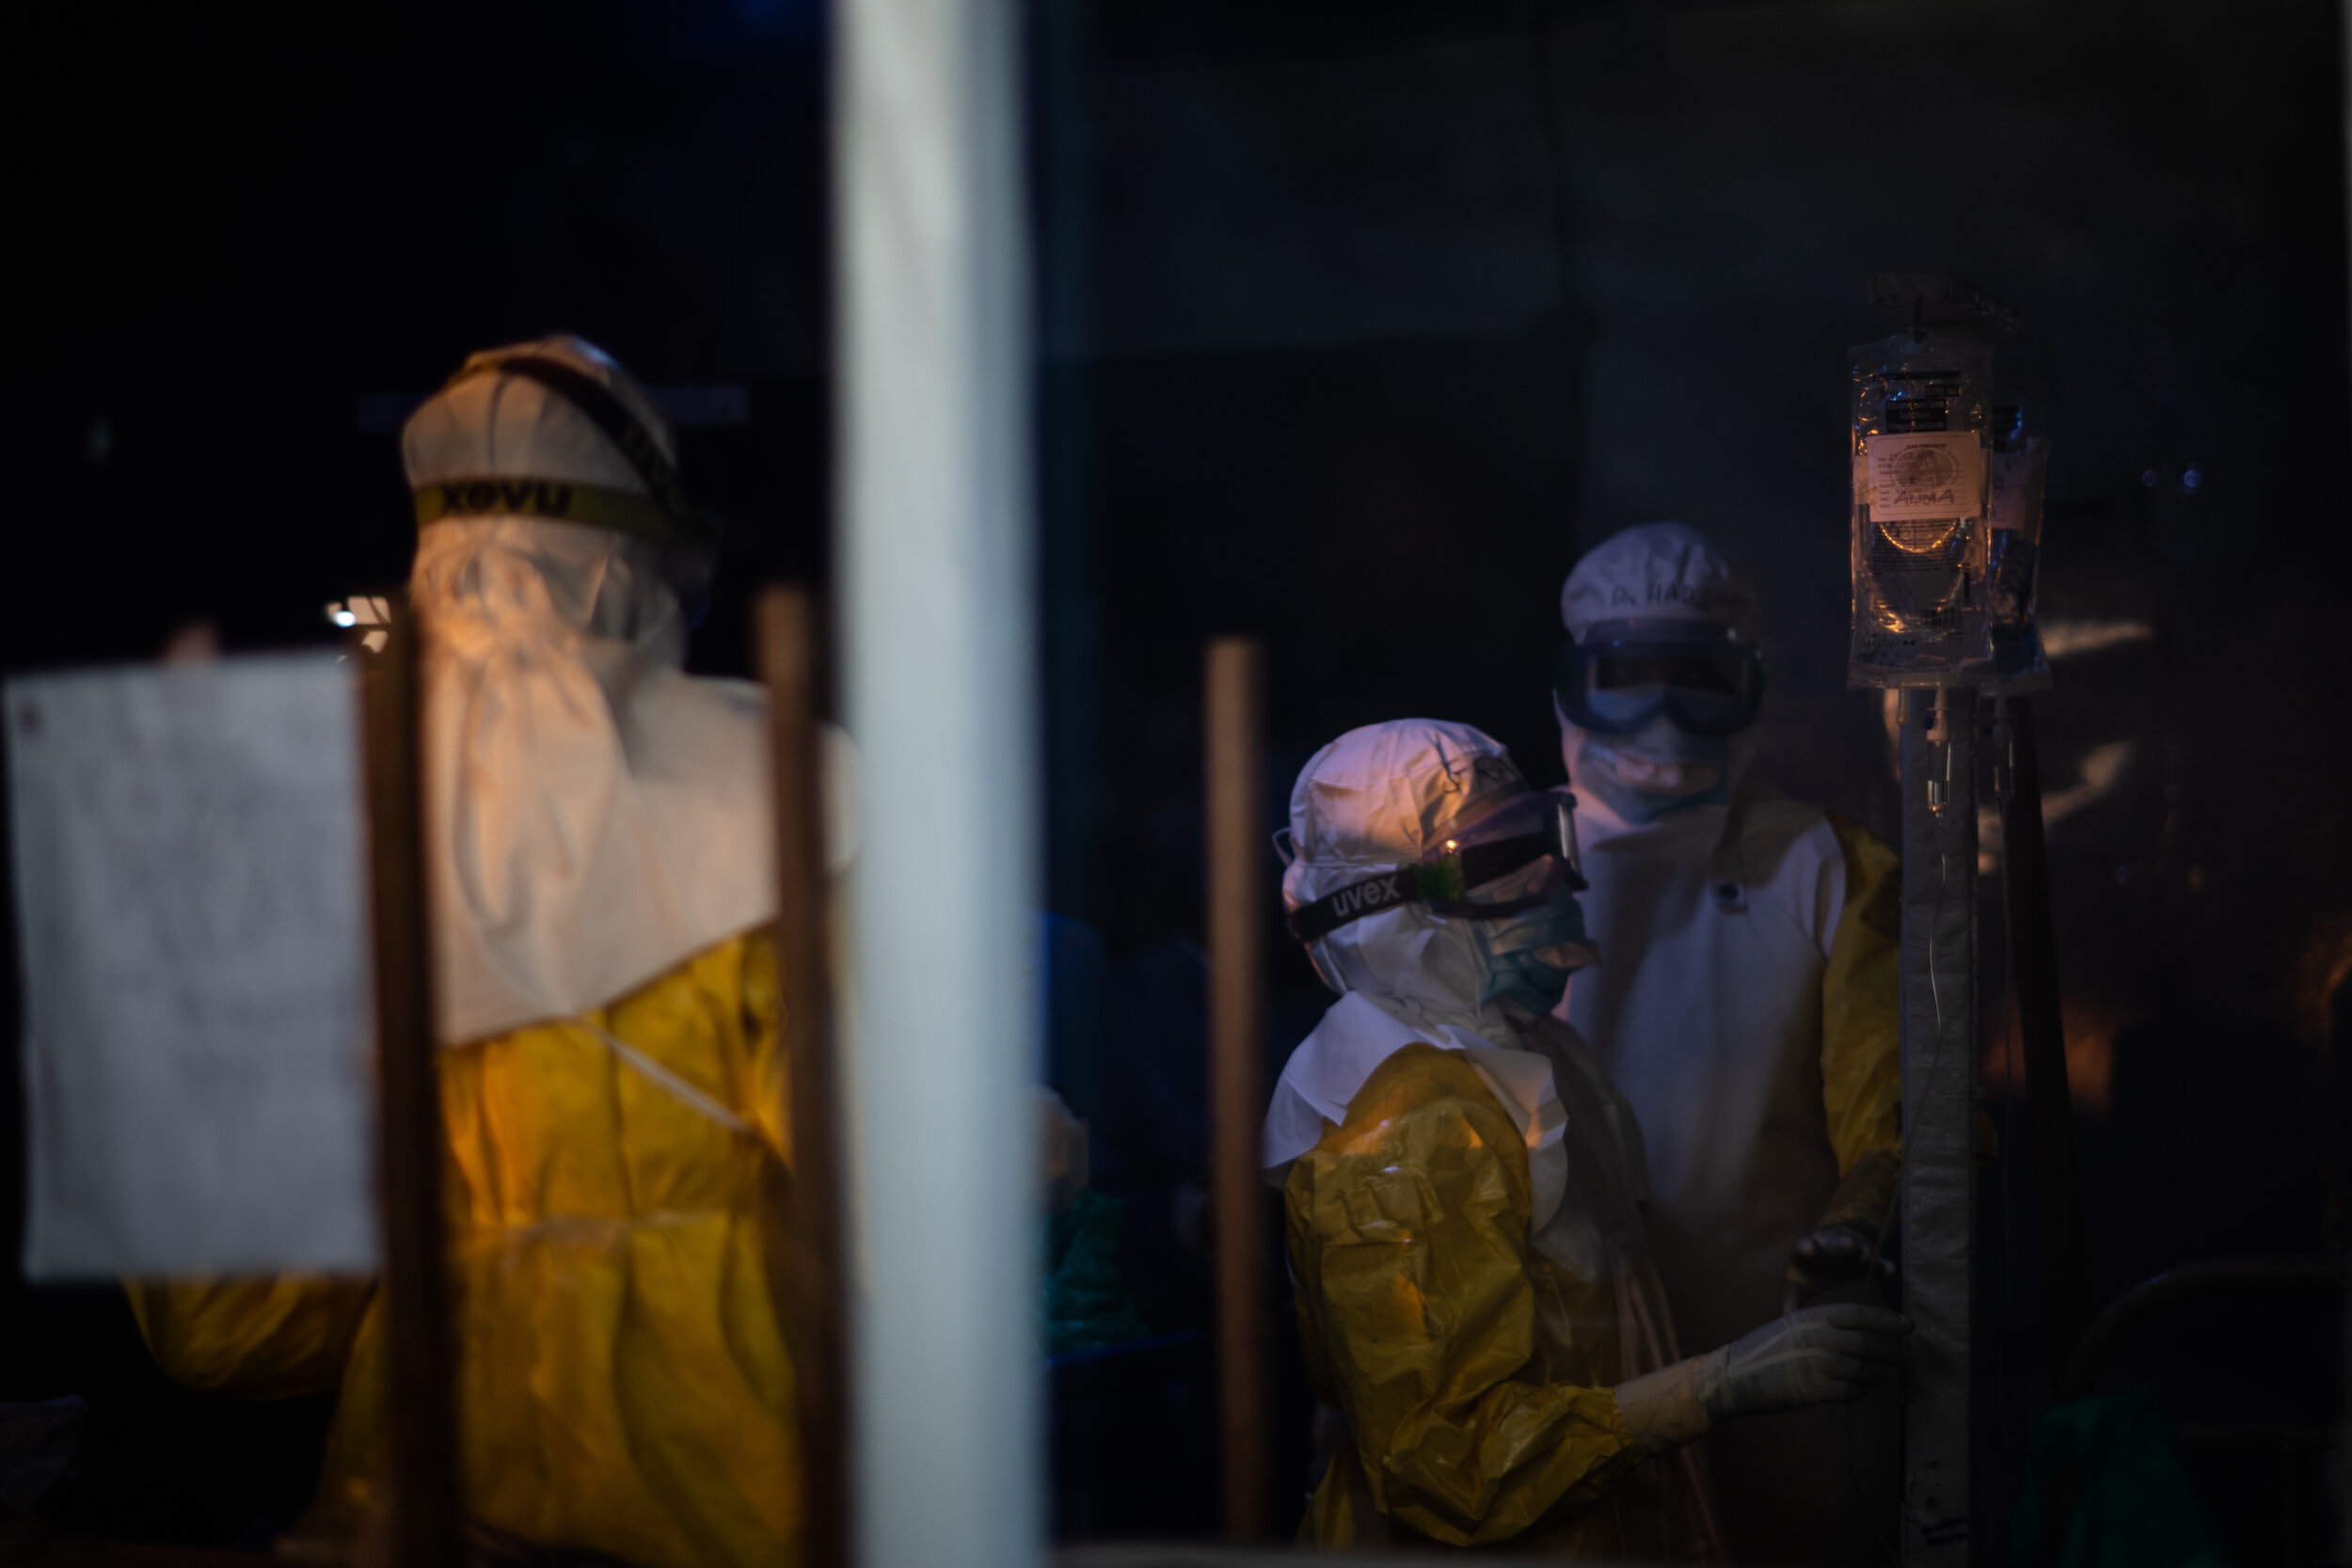  medics checking on patients at sunset, at Beni Ebola treatment center, The Democratic Republic of Congo, 2019 